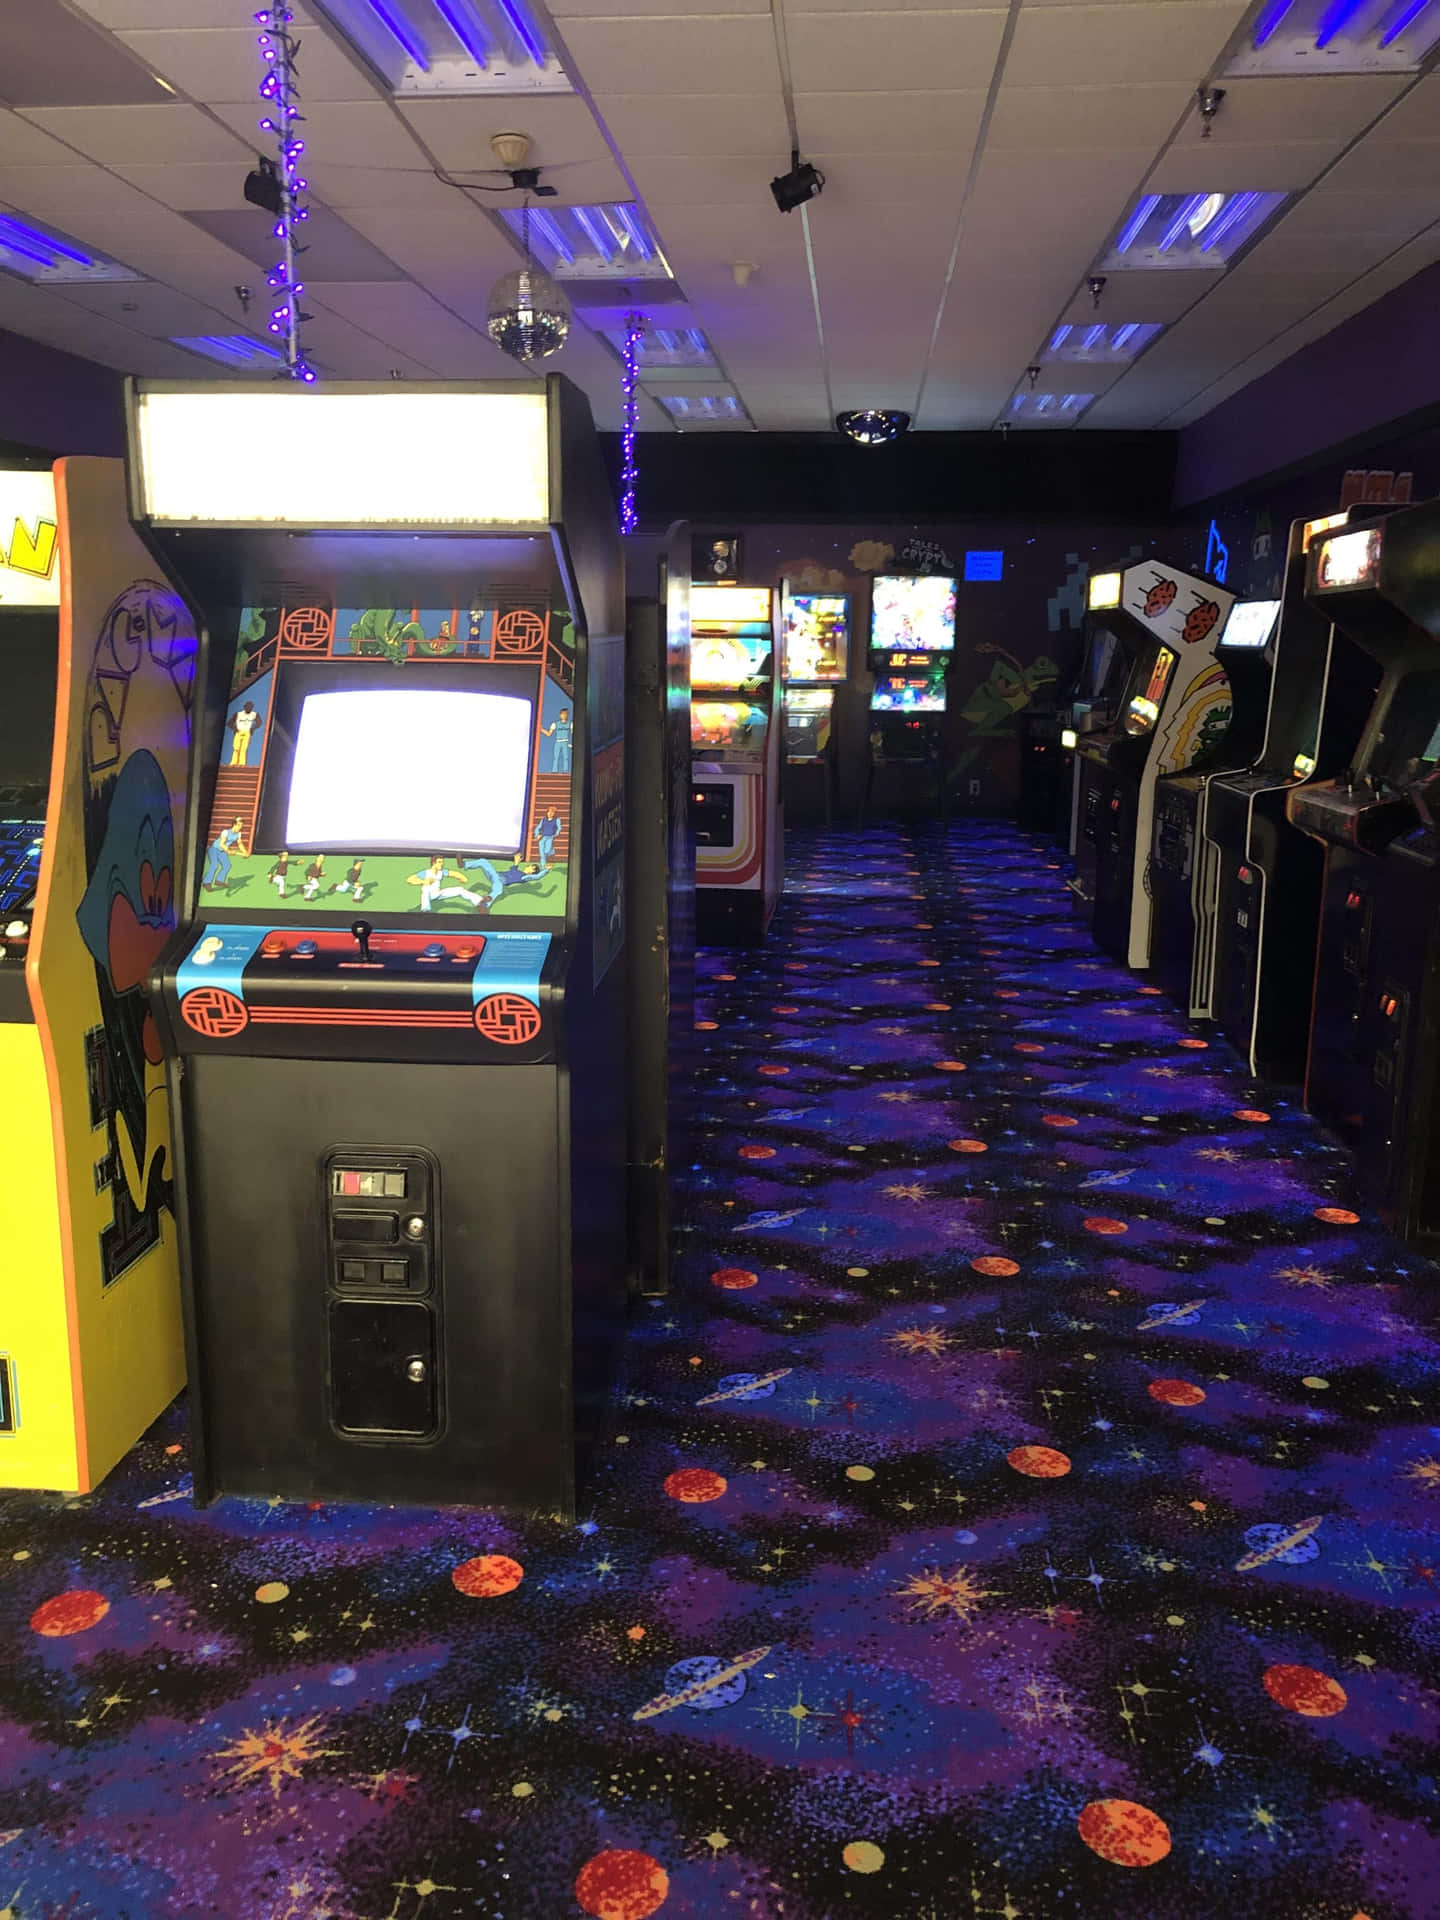 Arcade Machines In A Room With Purple Carpet Wallpaper